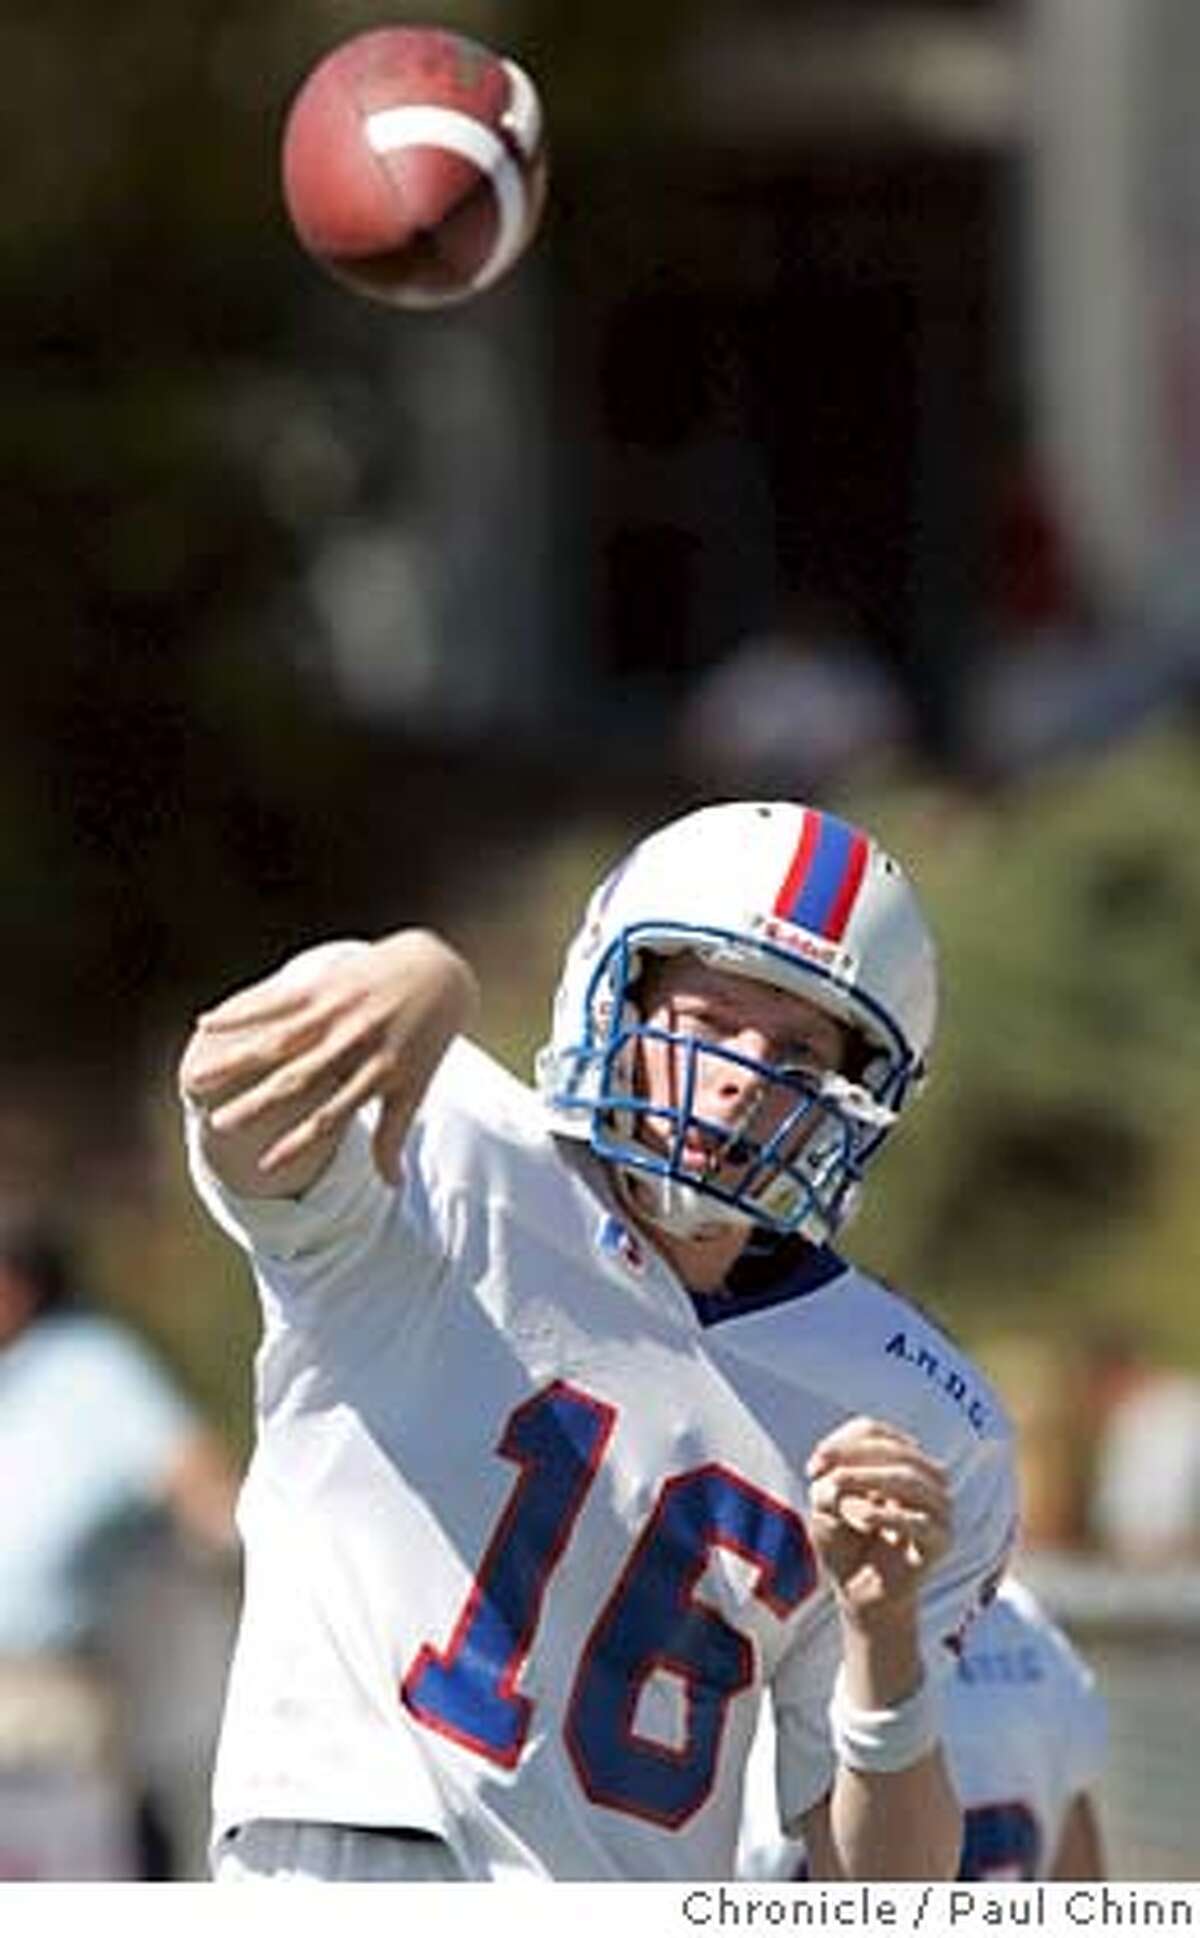 St. Ignatius quarterback Greg Mangan warms up on the sideline before entering the game in the 2nd quarter. St. Ignatius vs. Marin Catholic prep football game on 9/11/04 in Kentfield, CA. PAUL CHINN/The Chronicle